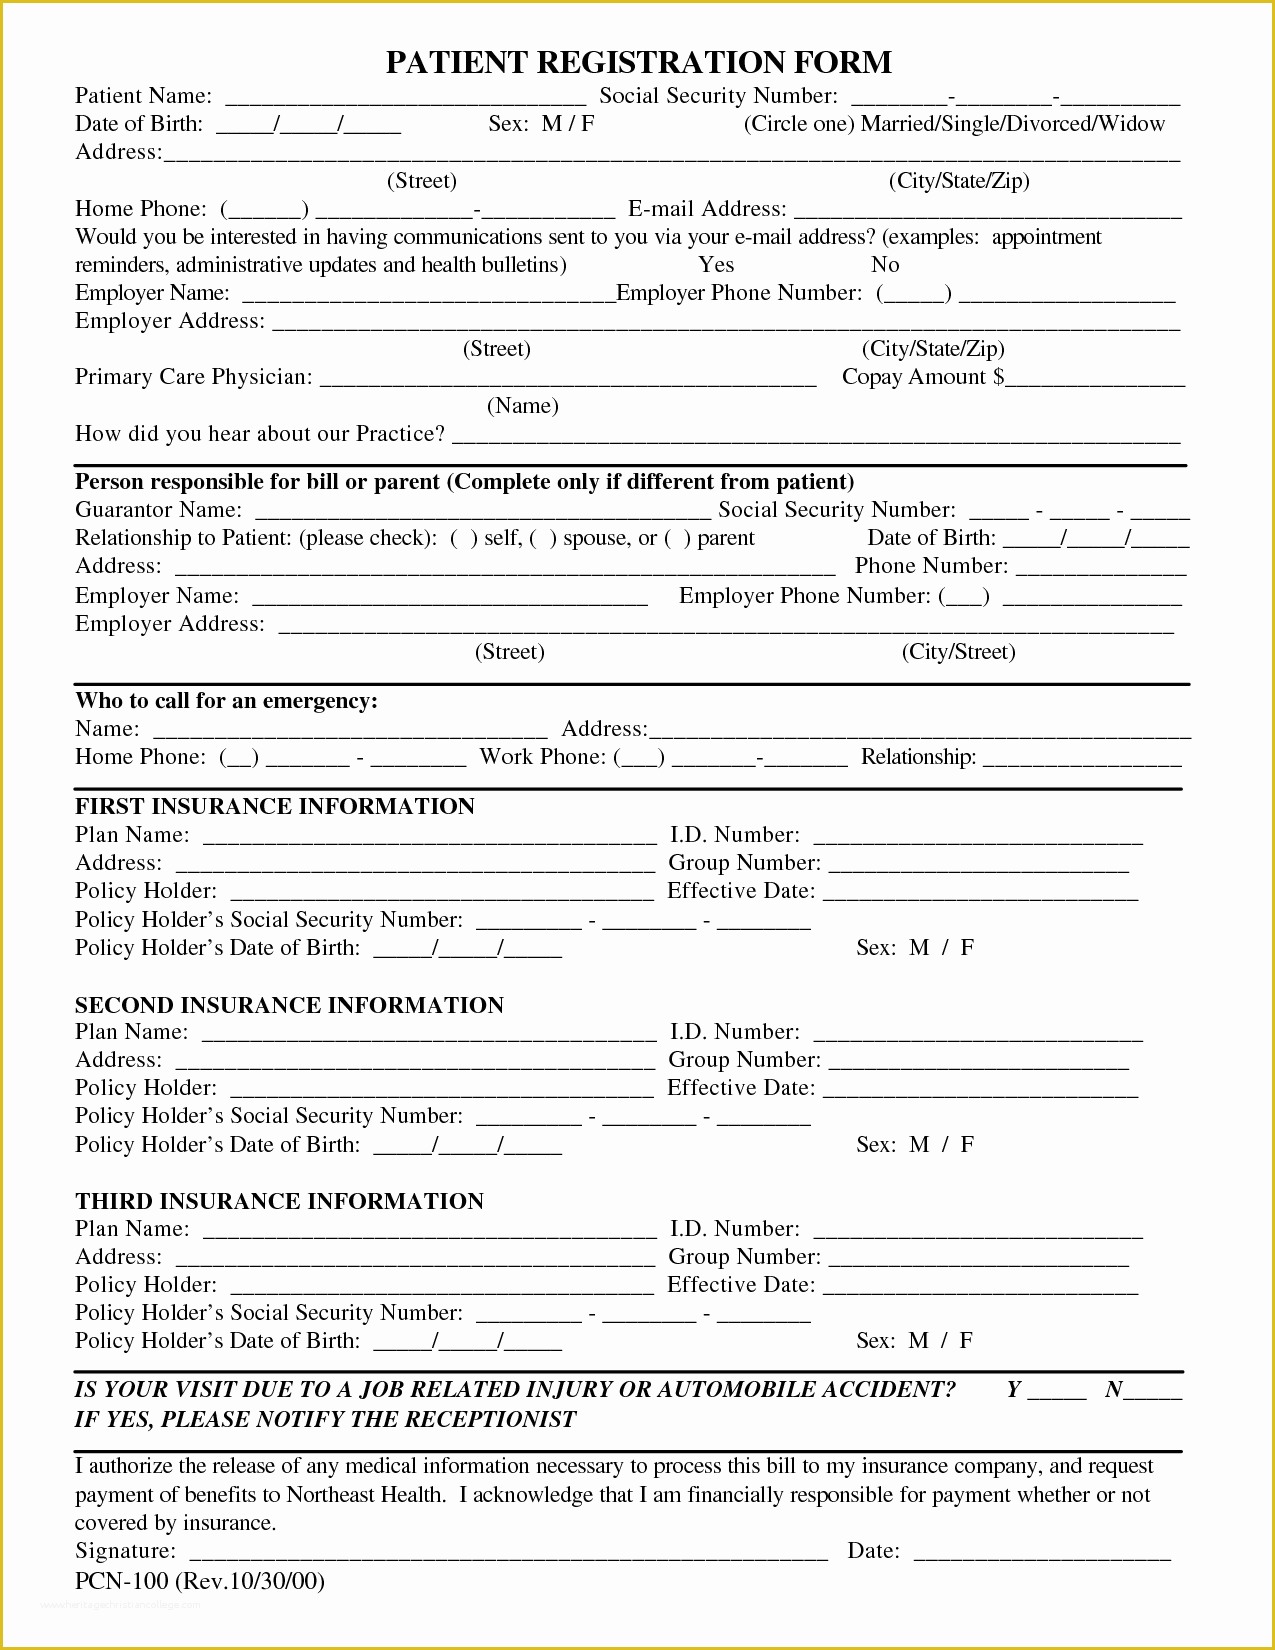 Free Registration form Template Of Free Patient Registration form Template